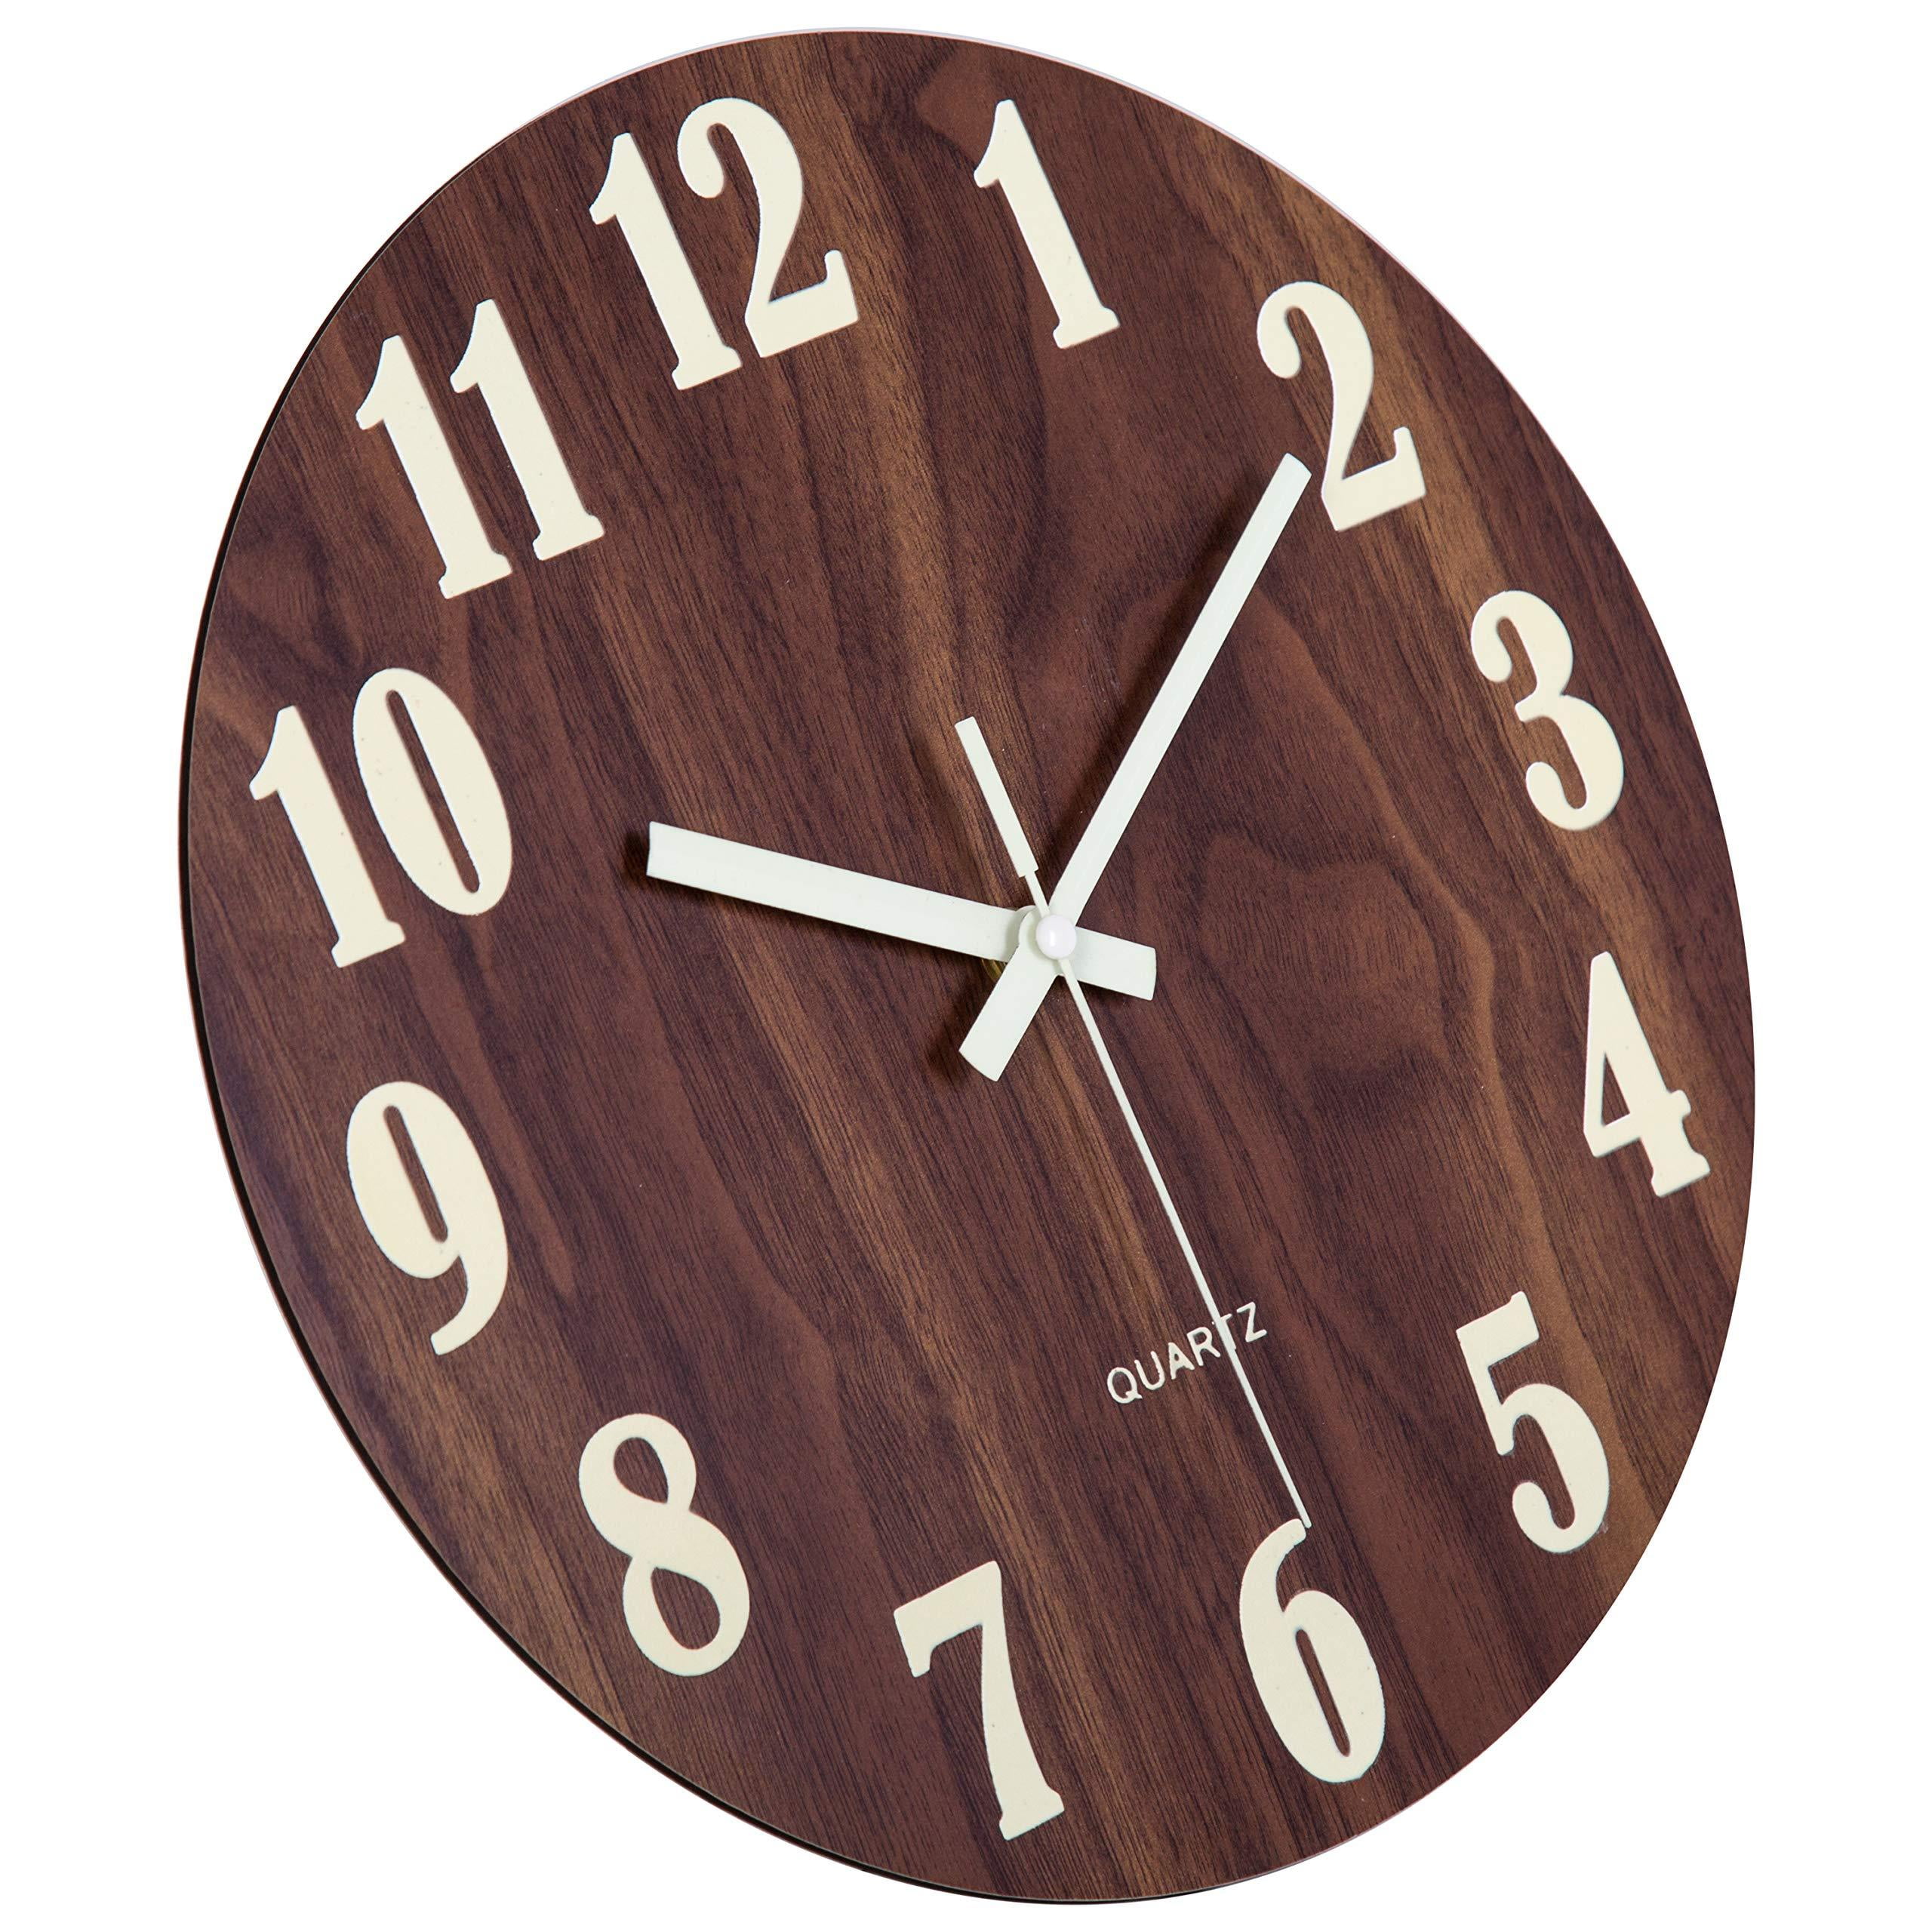 12 Inch Wooden Wall Clock,Vintage Round Home Decorative Wall Clock,Silent & Non-Ticking Big Numbers Easy to Read,Battery Powered,Kitchen/Living Room/Bedroom/Office/Classroom Rustic Clock 